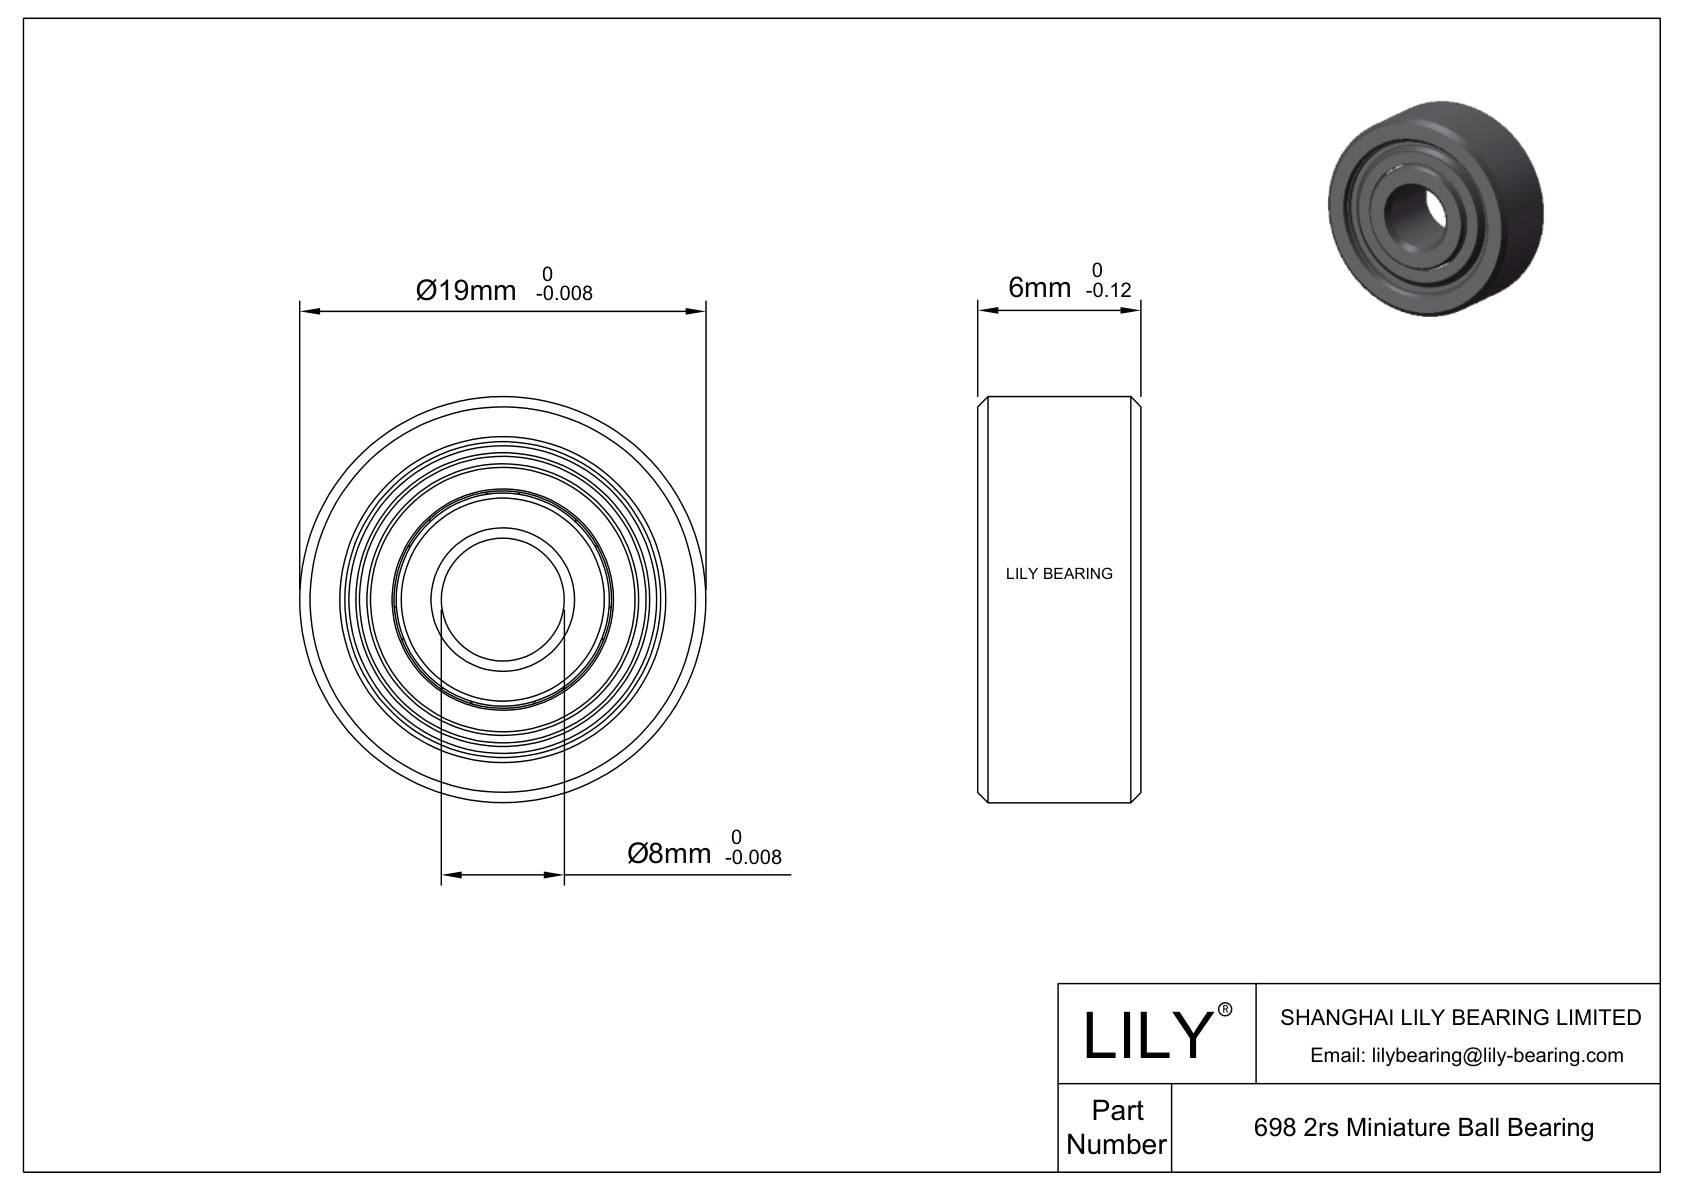 LILY-PUT69840-30 Outsourcing Polyurethane bearings cad drawing